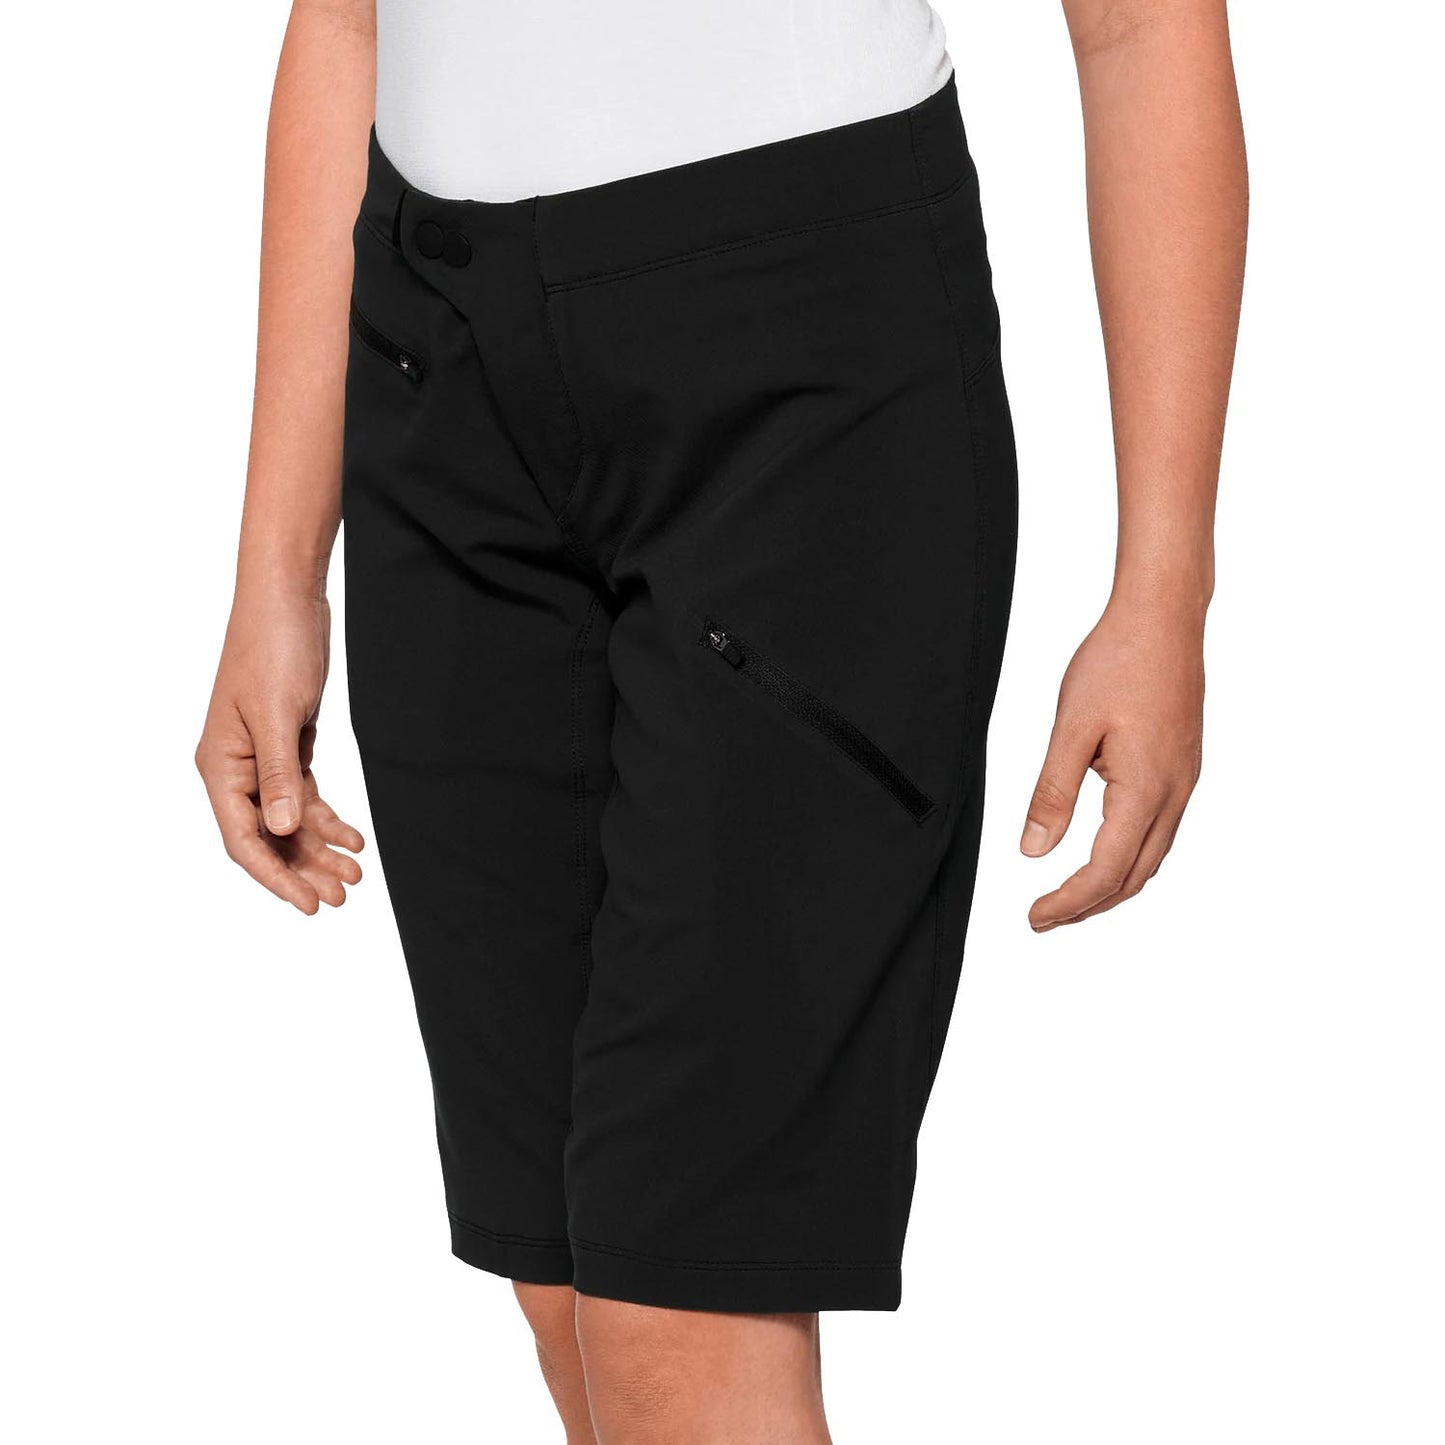 100 Percent Ridecamp Women's Shorts With Liner - L - Black